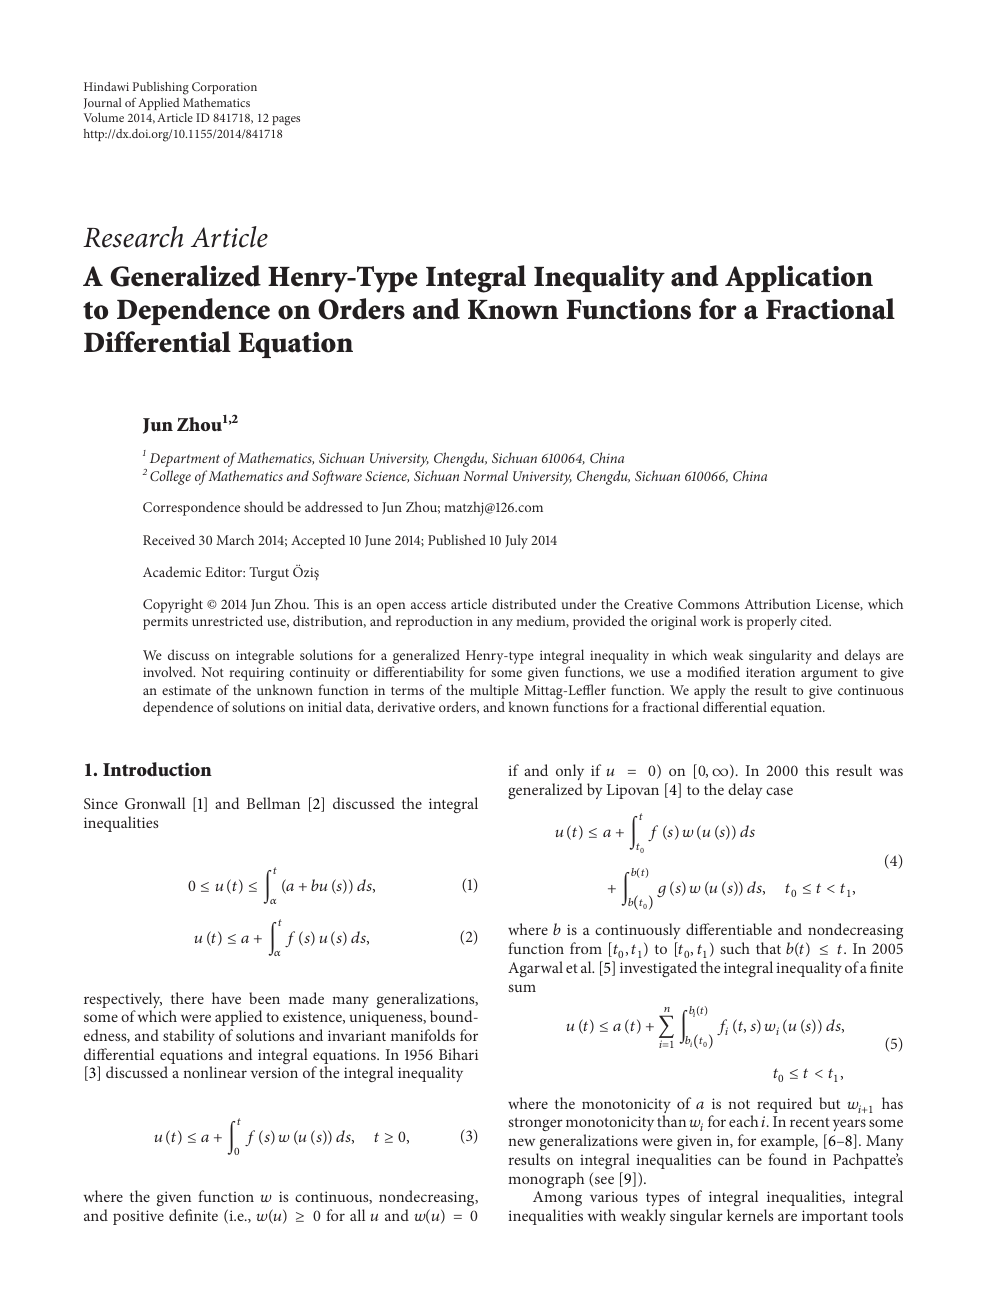 A Generalized Henry Type Integral Inequality And Application To Dependence On Orders And Known Functions For A Fractional Differential Equation Topic Of Research Paper In Mathematics Download Scholarly Article Pdf And Read